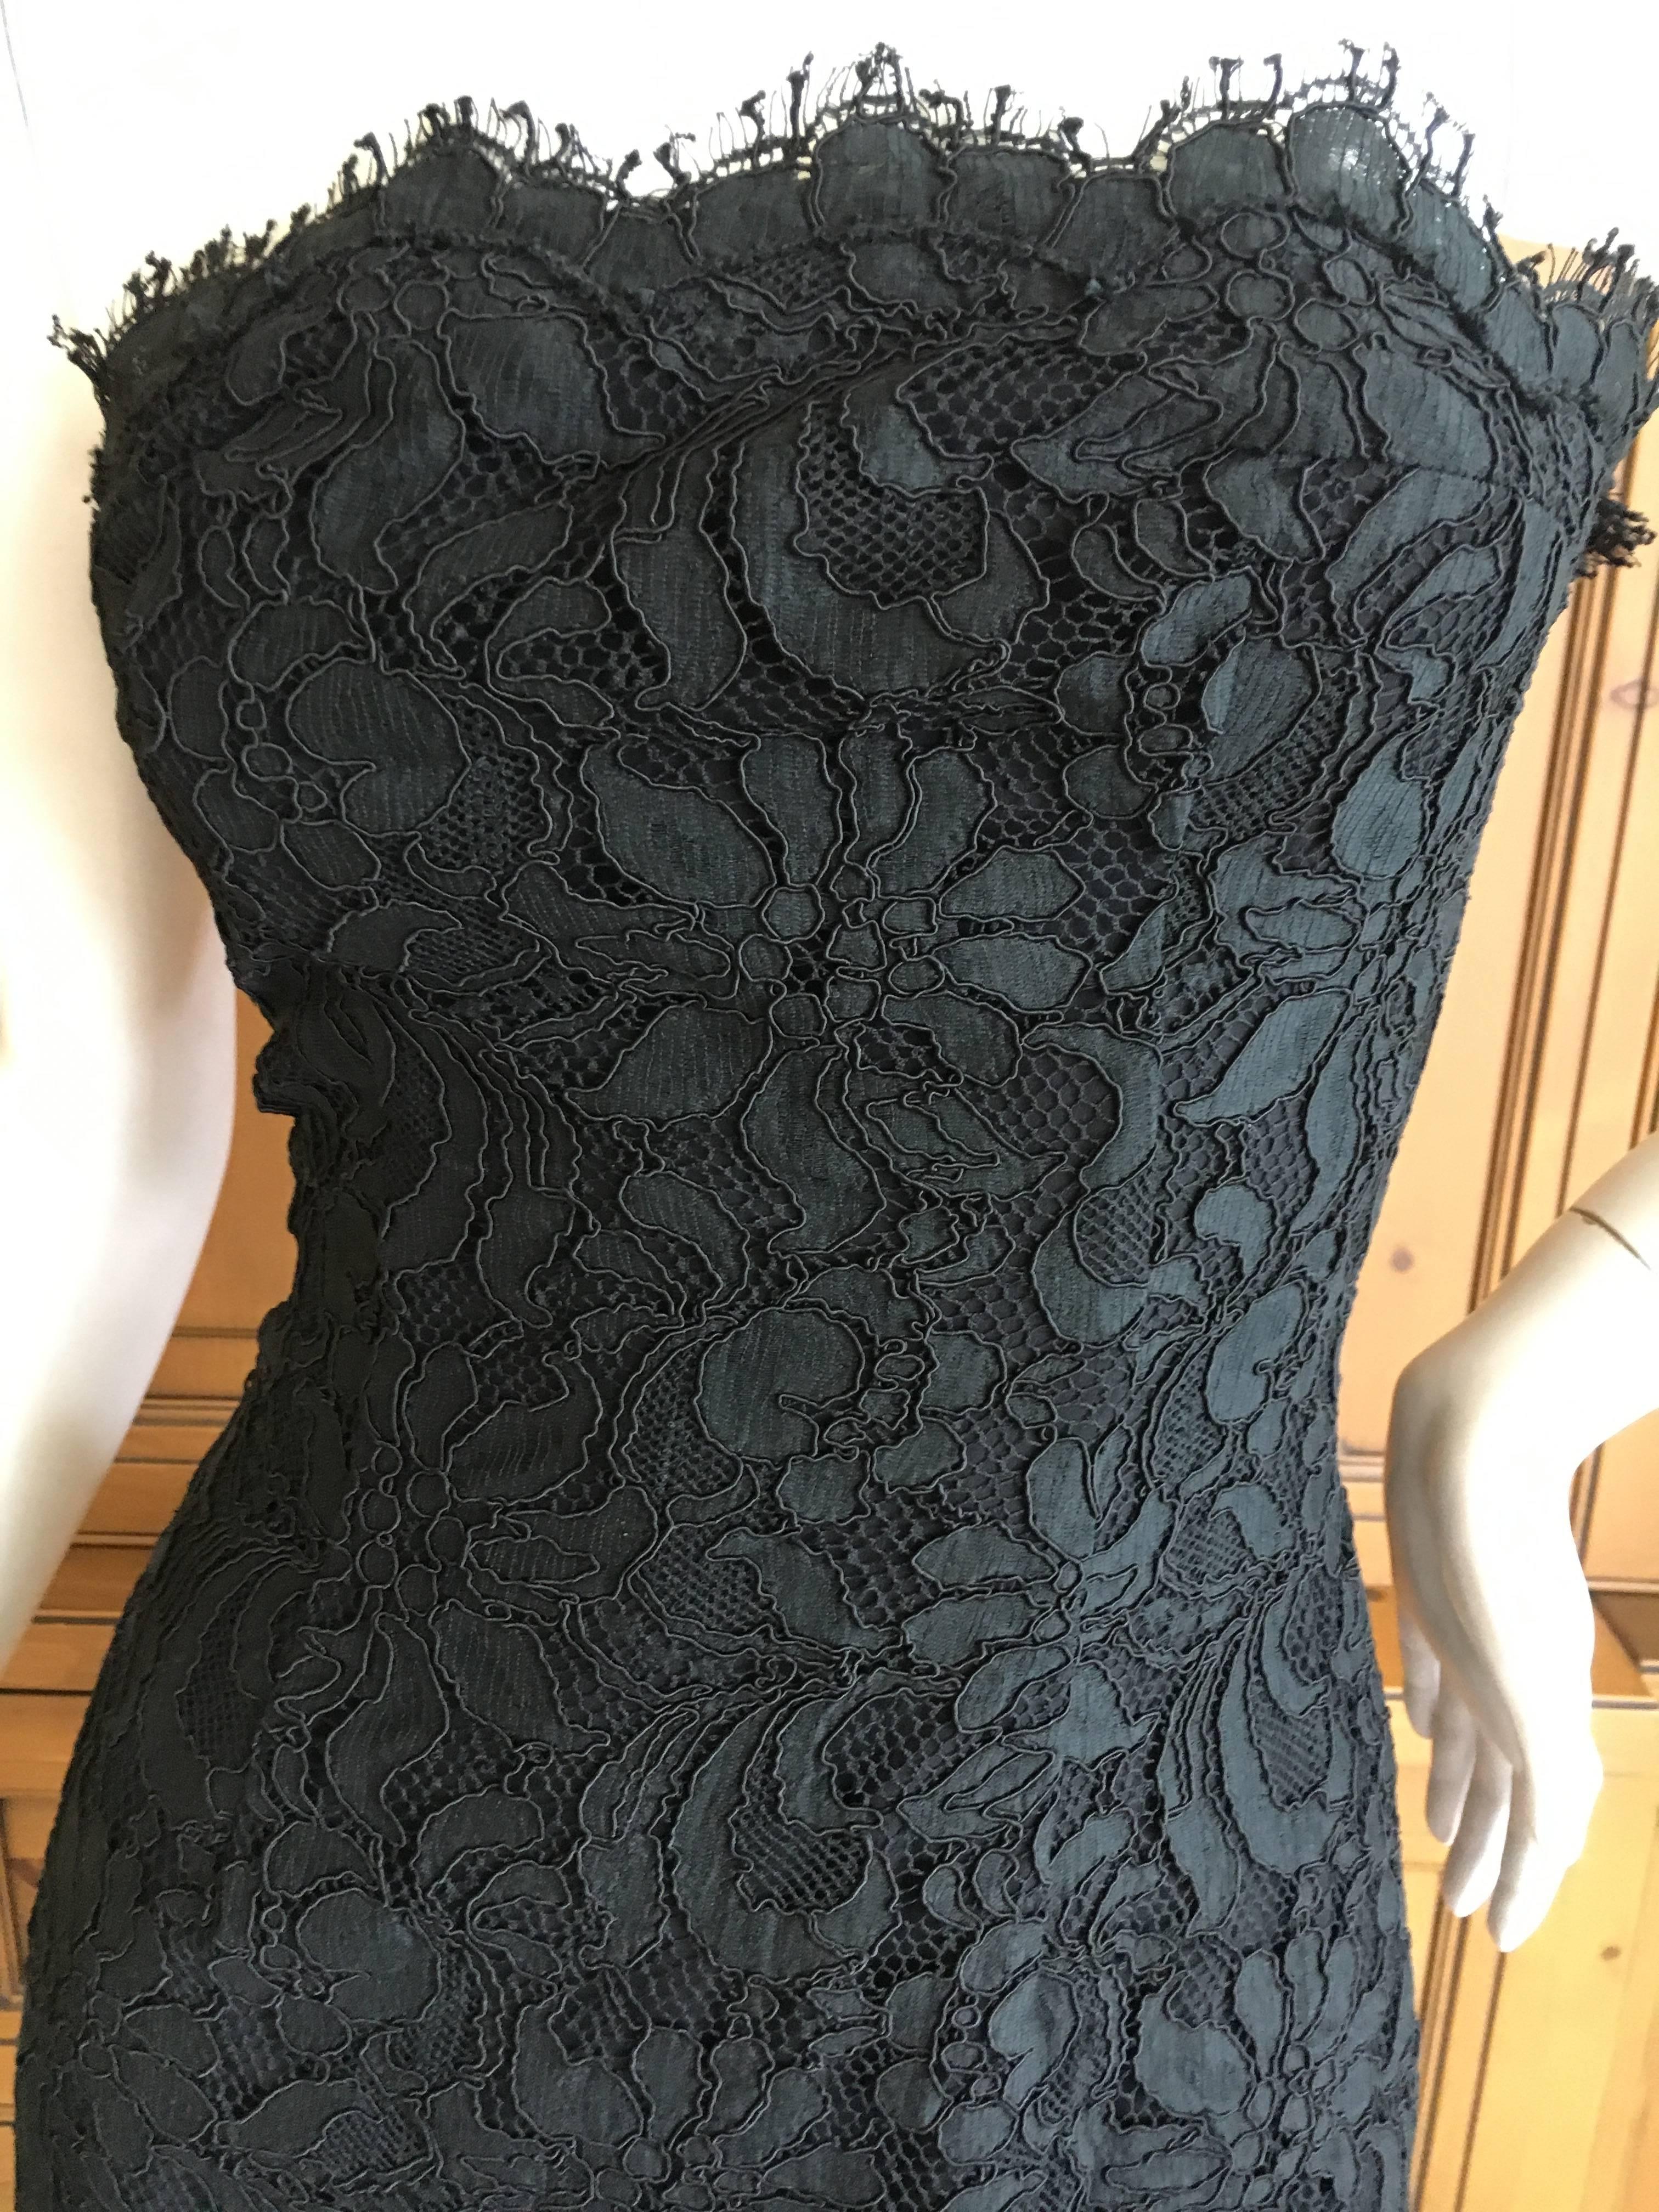 Exquisite Christian Lacroix Black Lace Strapless Mini Dress.
Lacroix was a master of fashioning lace, a legacy of his Arles upbringing , and this is a wonderful example.
Simple and sweet
Marked size 34 but it is tiny
Bust 34